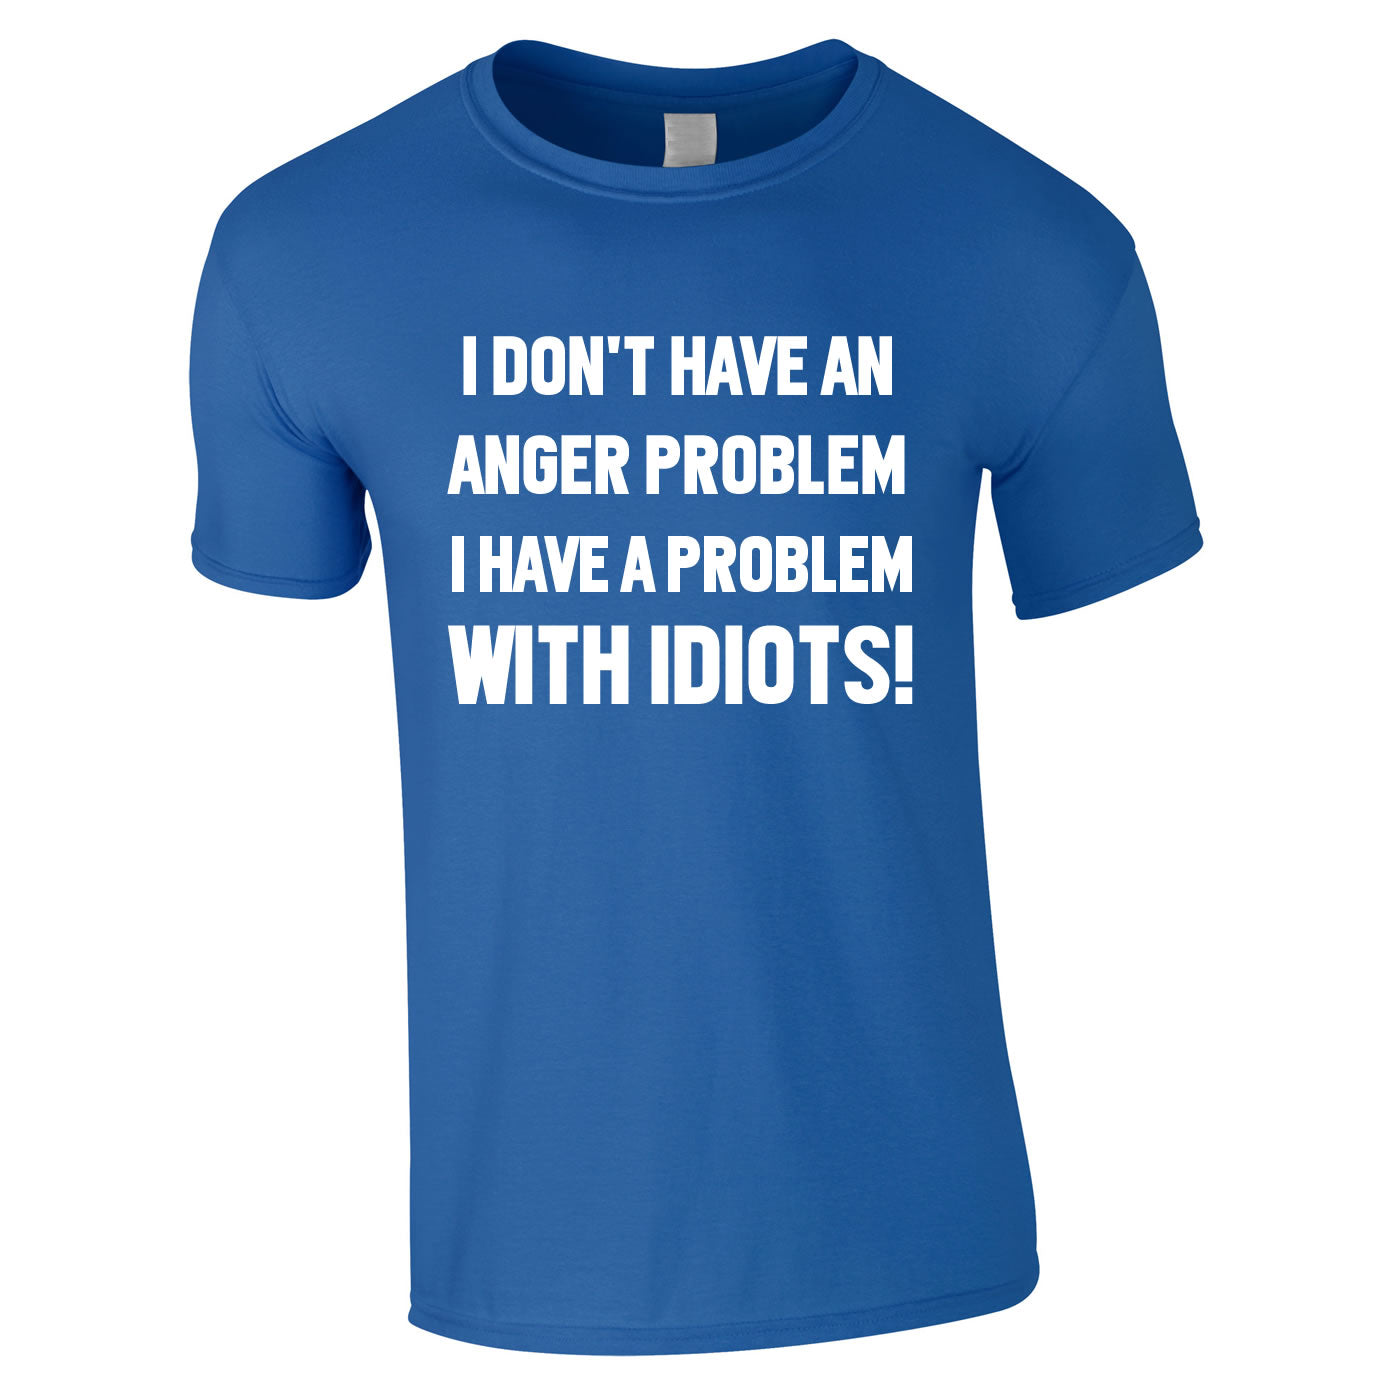 I Don't Have An Anger Problem. I Have A Problem With Idiots